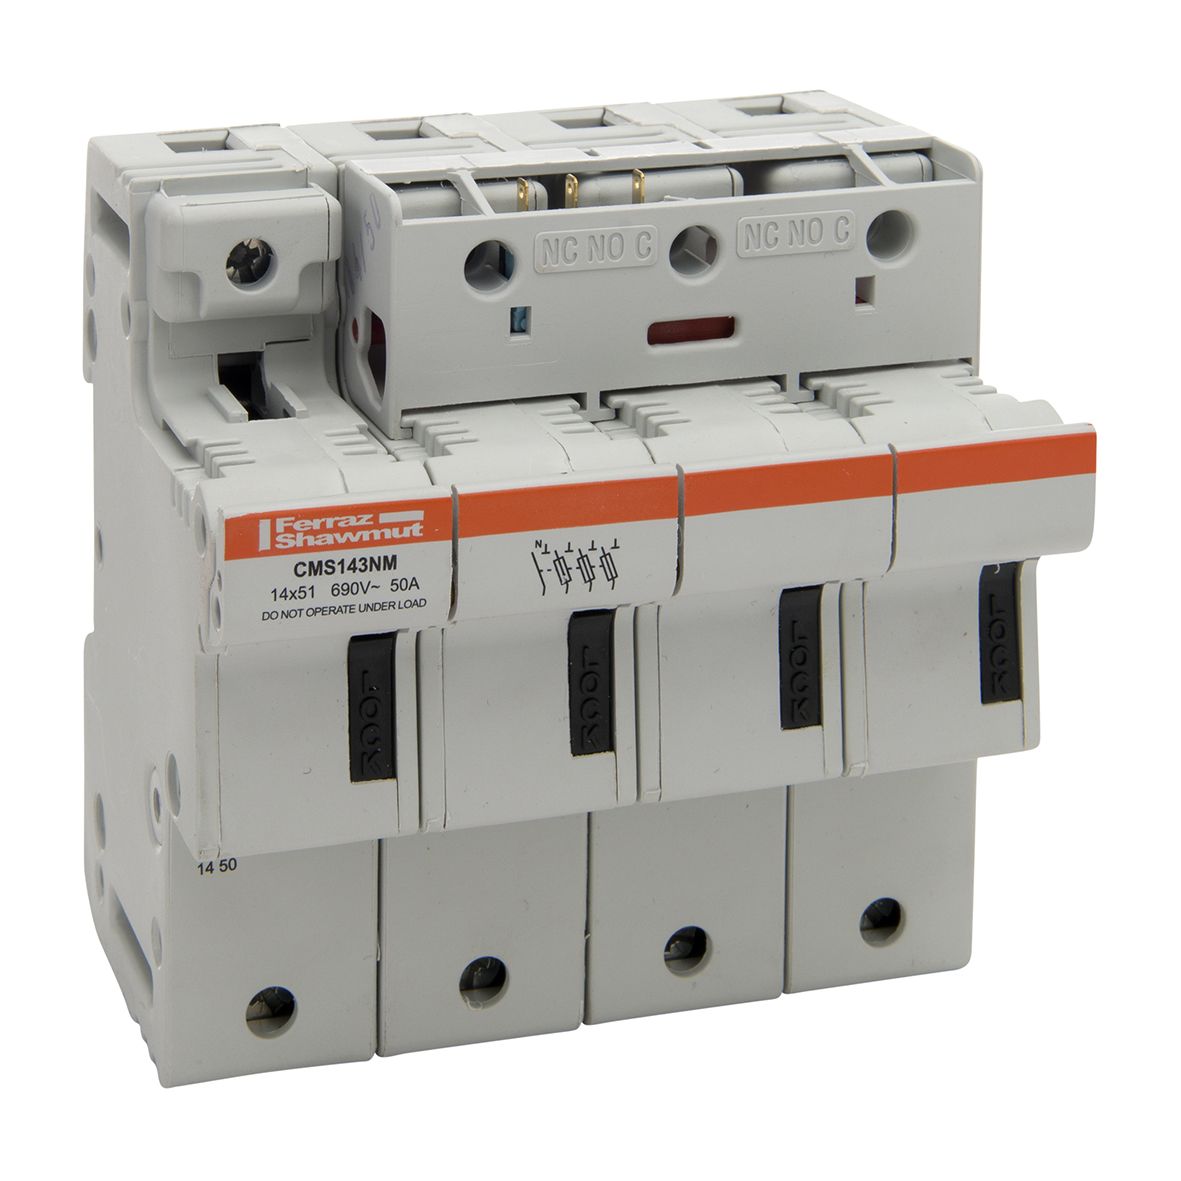 E331043 - modular fuse holder, IEC, 3P+N, 14x51, DIN rail mounting, IP20, with MS